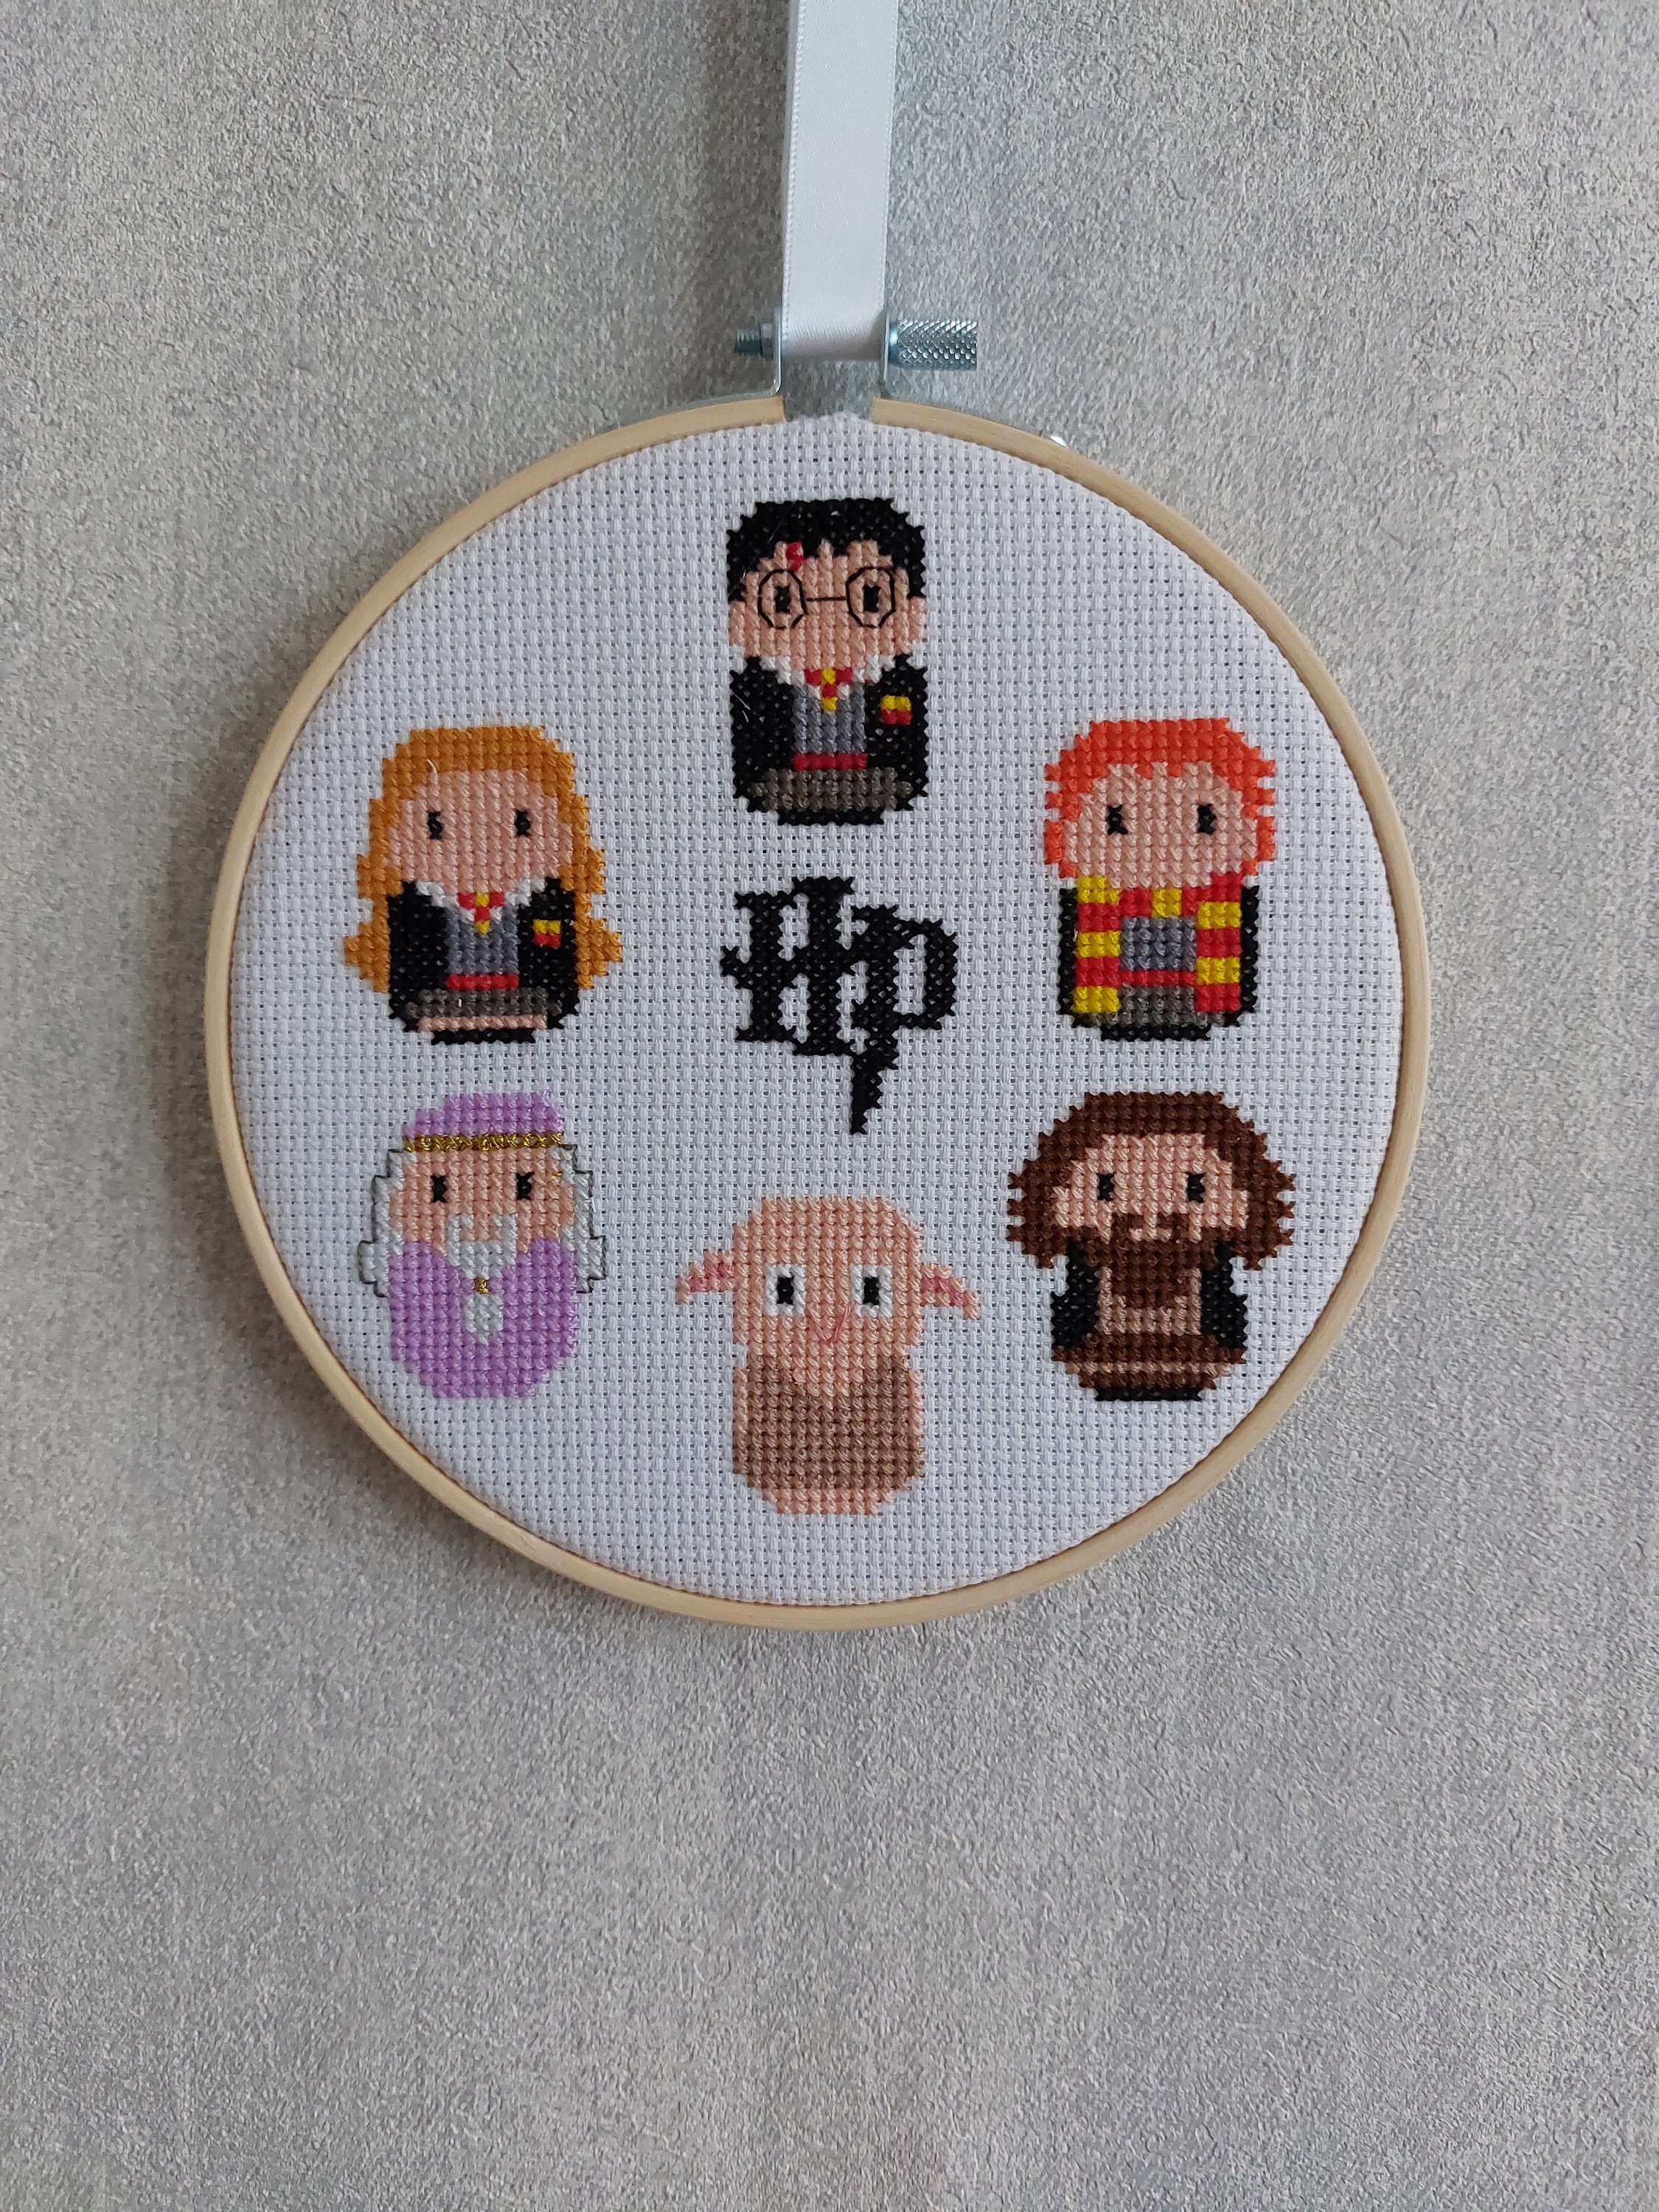 FO] Finished a Harry Potter cross stitch. I got the pattern from . :  r/CrossStitch